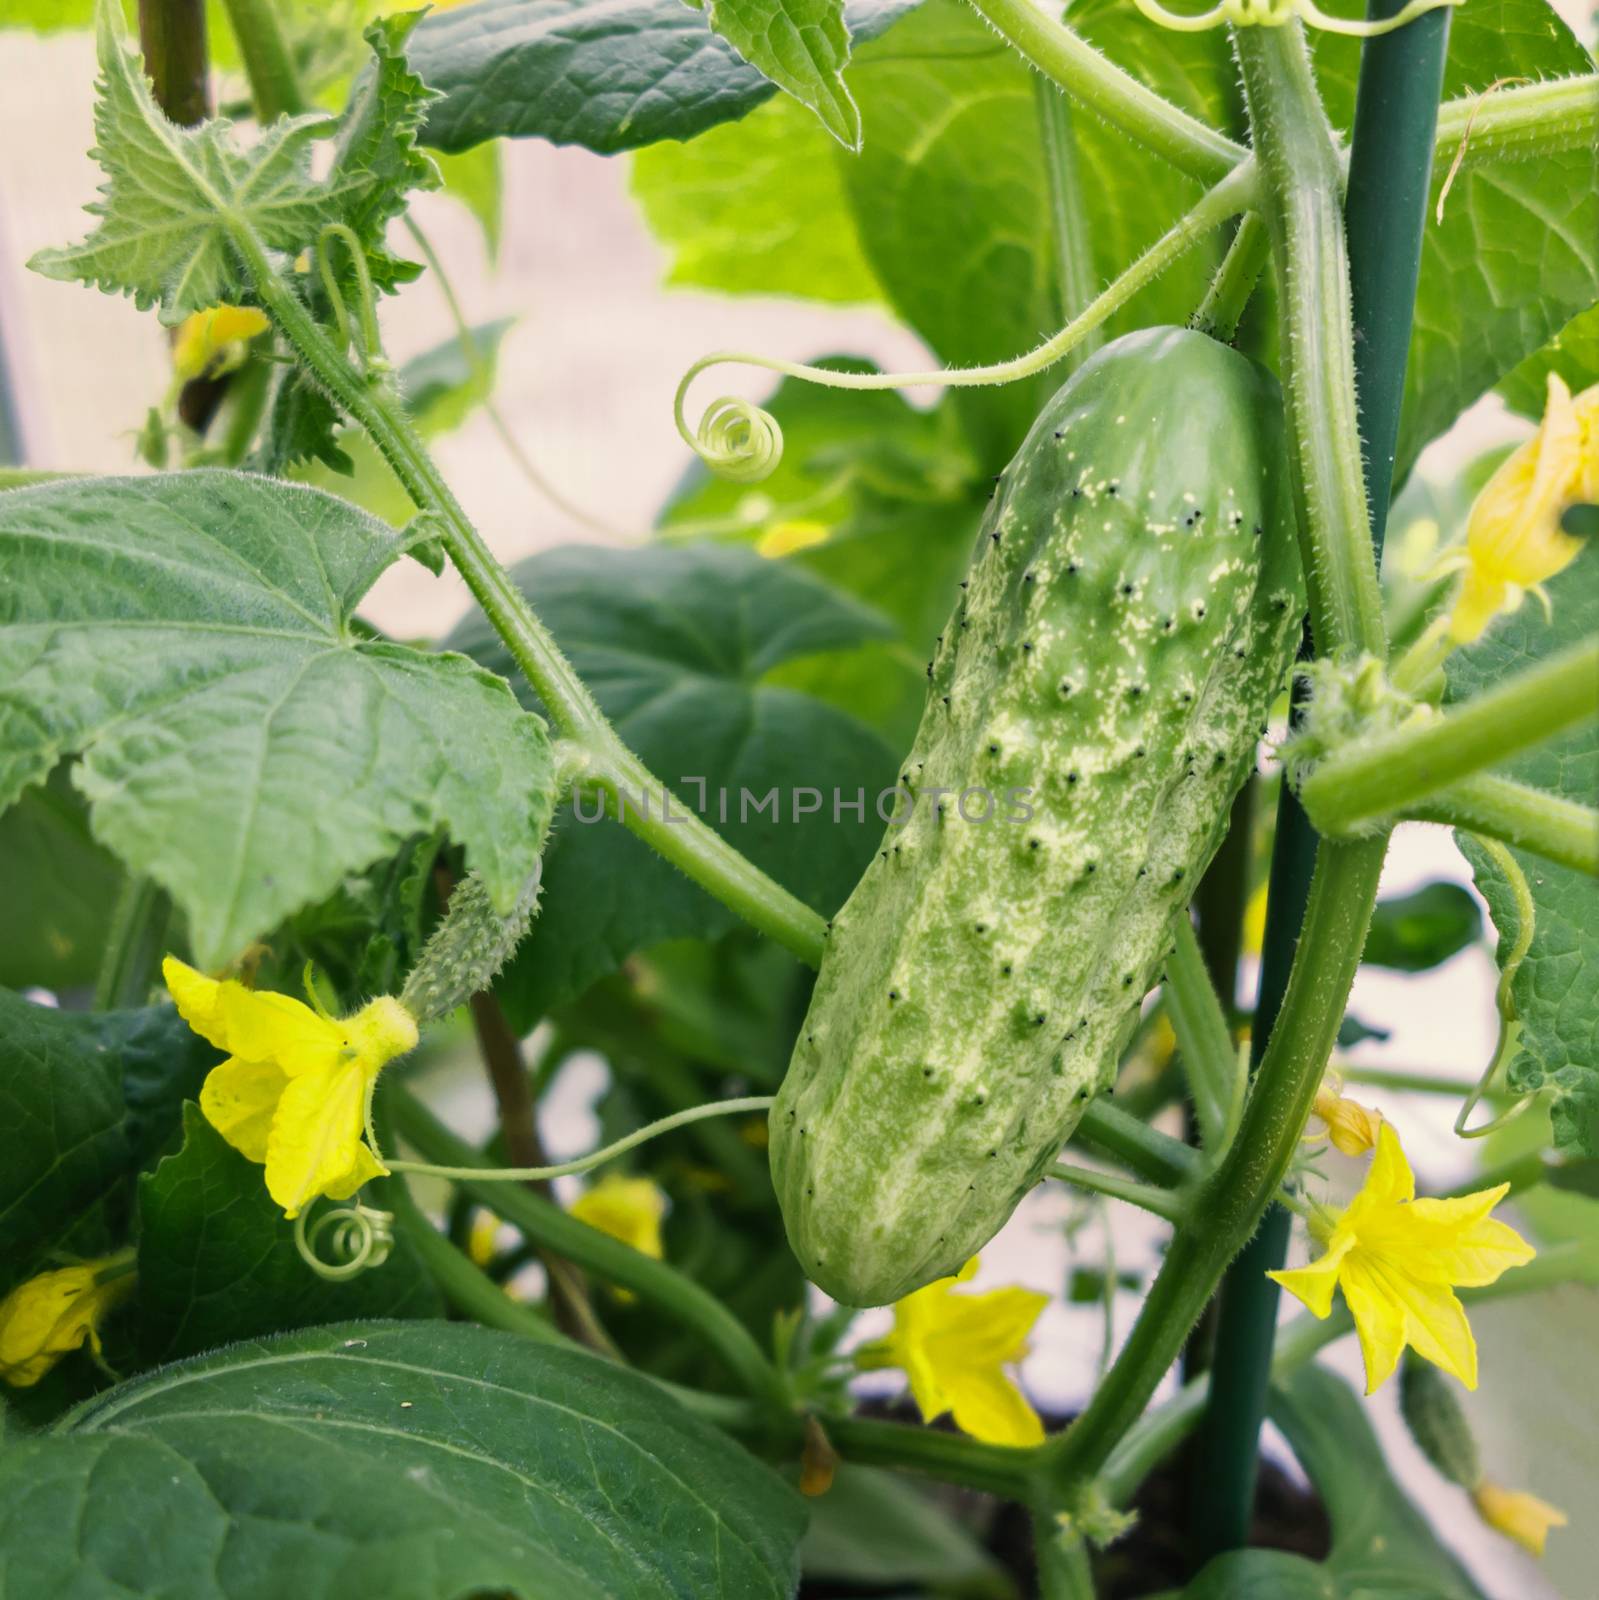 Green cucumber grows on the bed in the greenhouse.